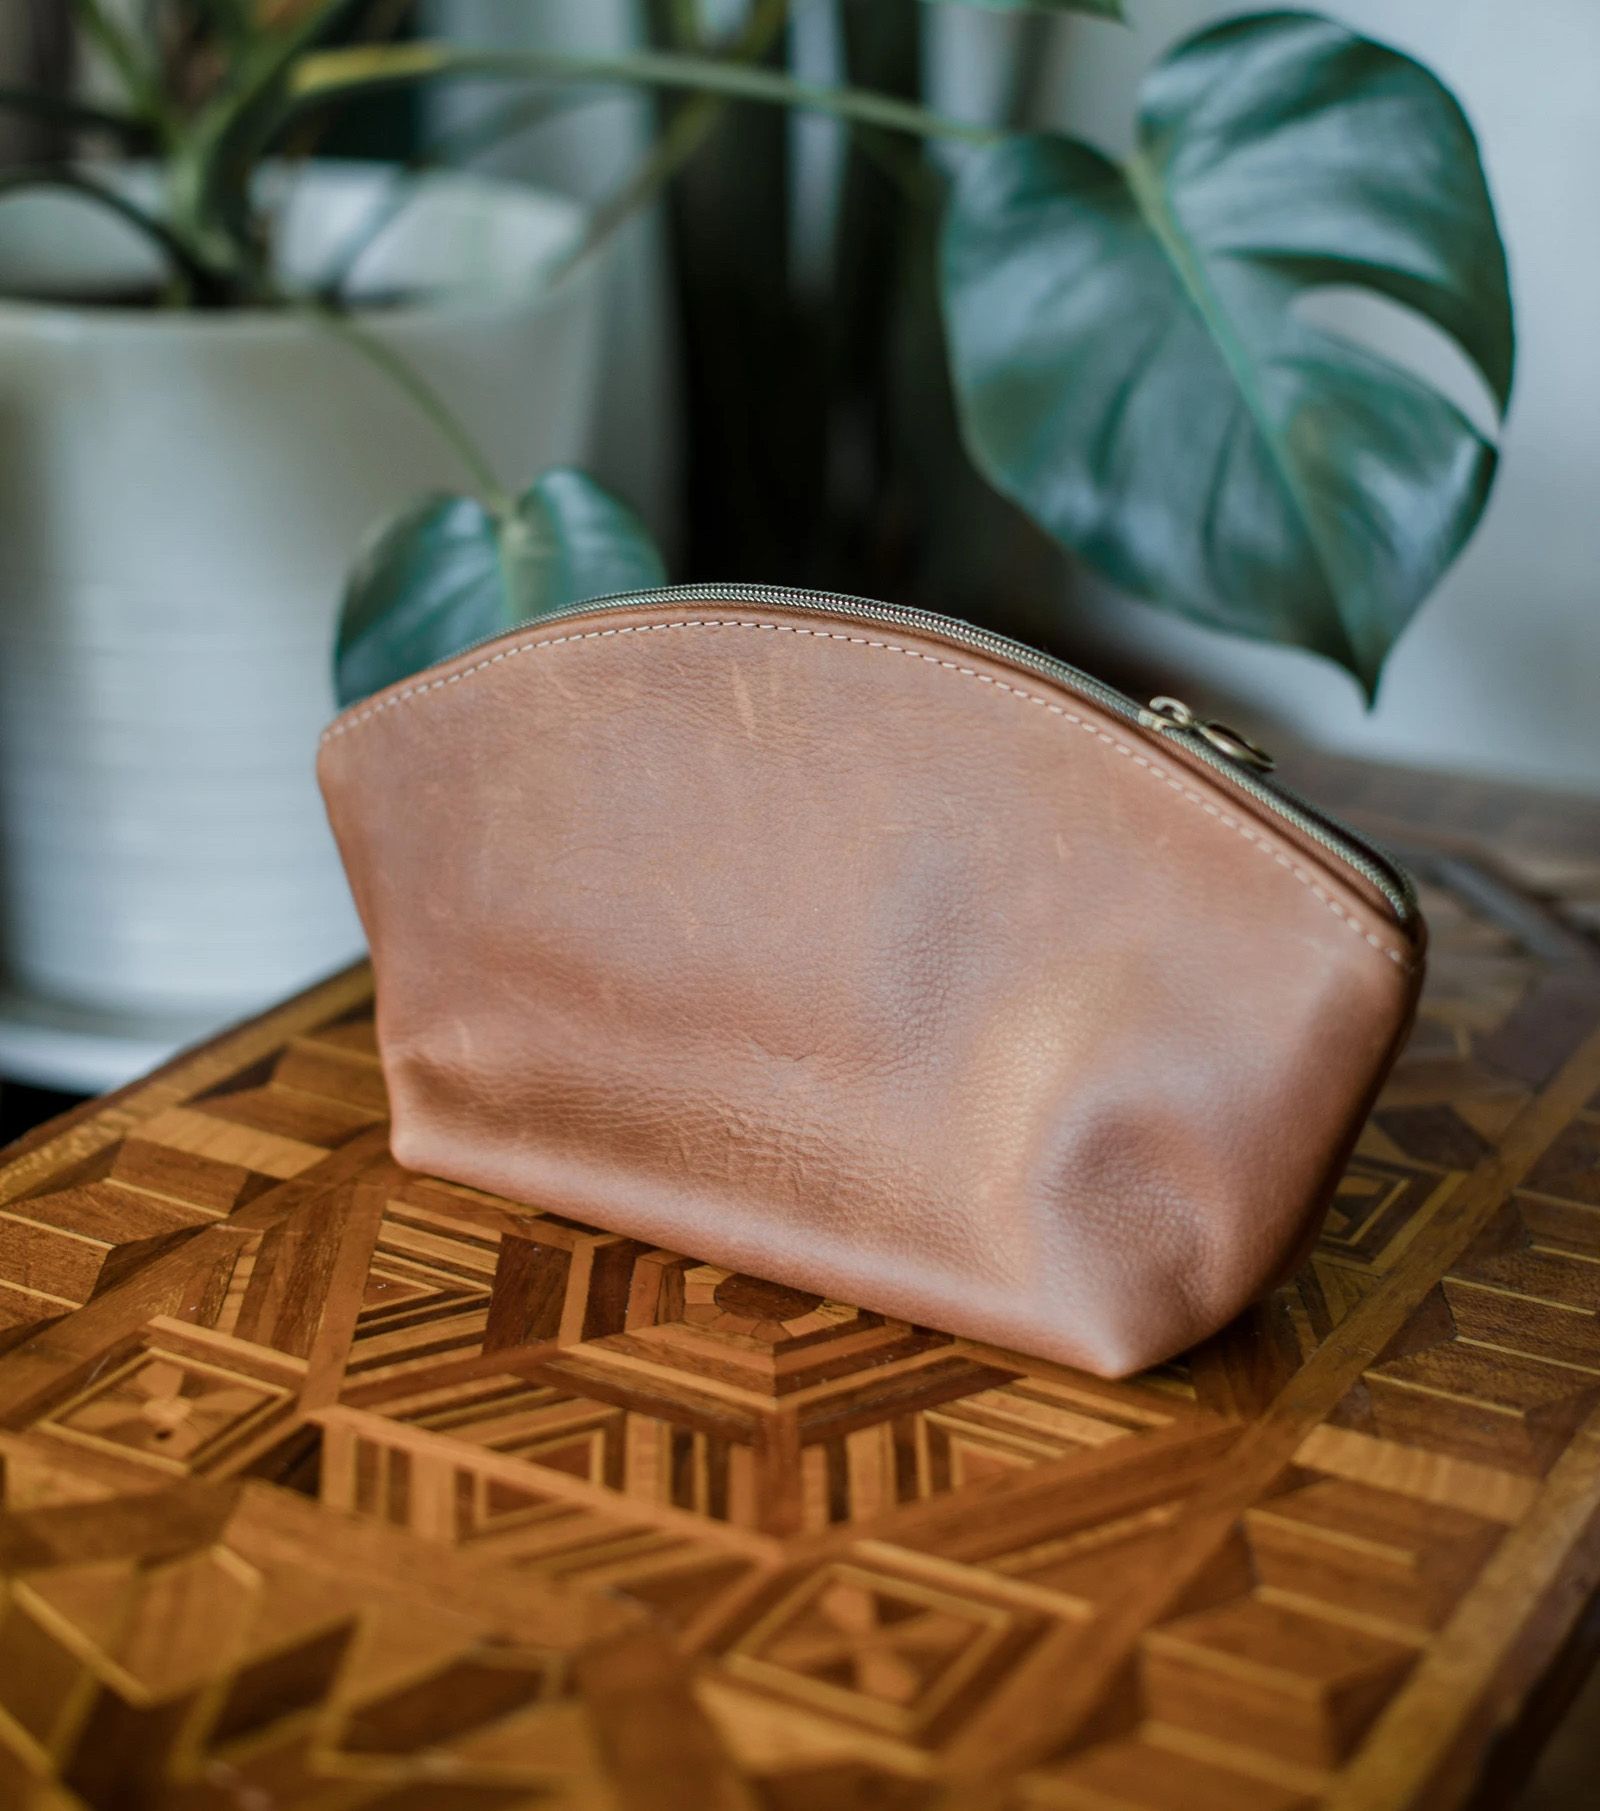 A brown leather cosmetics bag with a zipper on a wooden table with inlaid design, with a plant in the background.